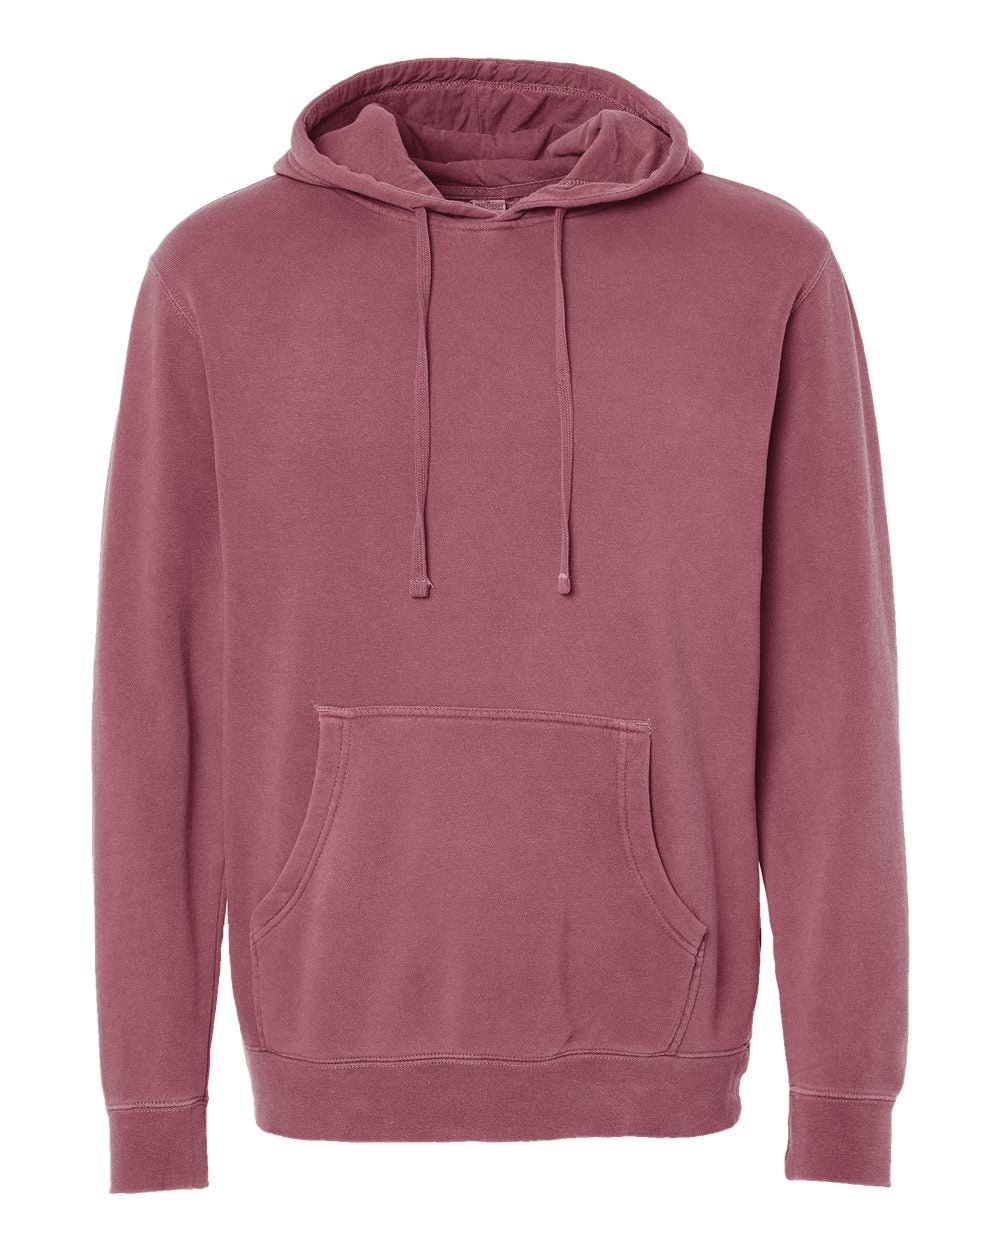 Independent Pigment-Dyed Hoodie (PRM4500) in Pigment Maroon